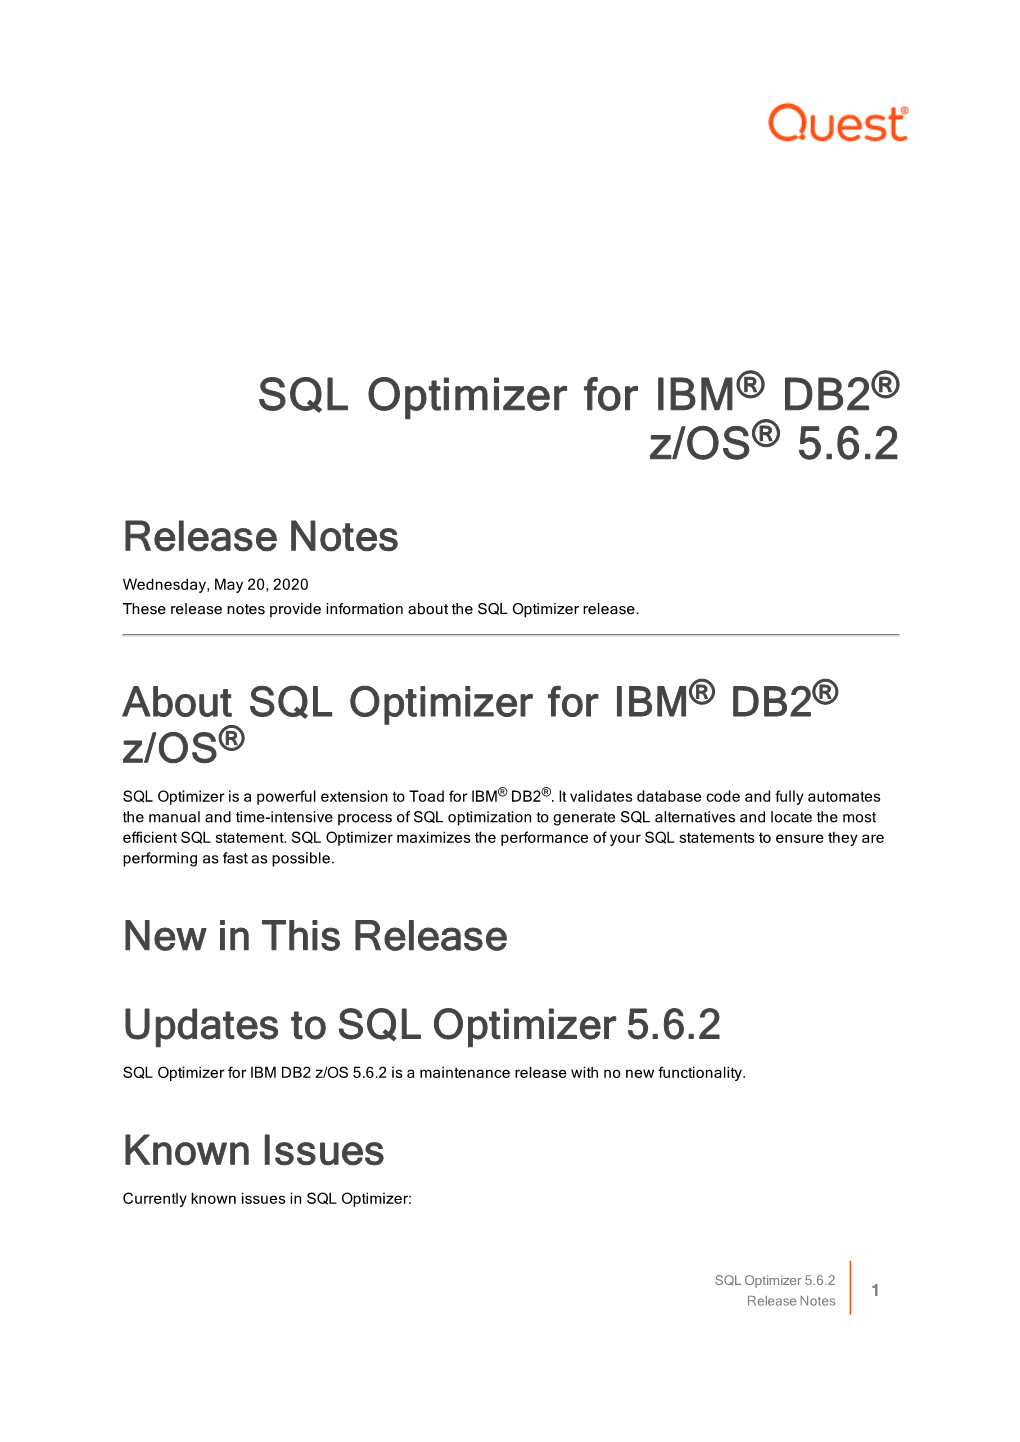 Quest SQL Optimizer for IBM DB2 Z/OS 5.6.2 Release Package Contains the Following Products